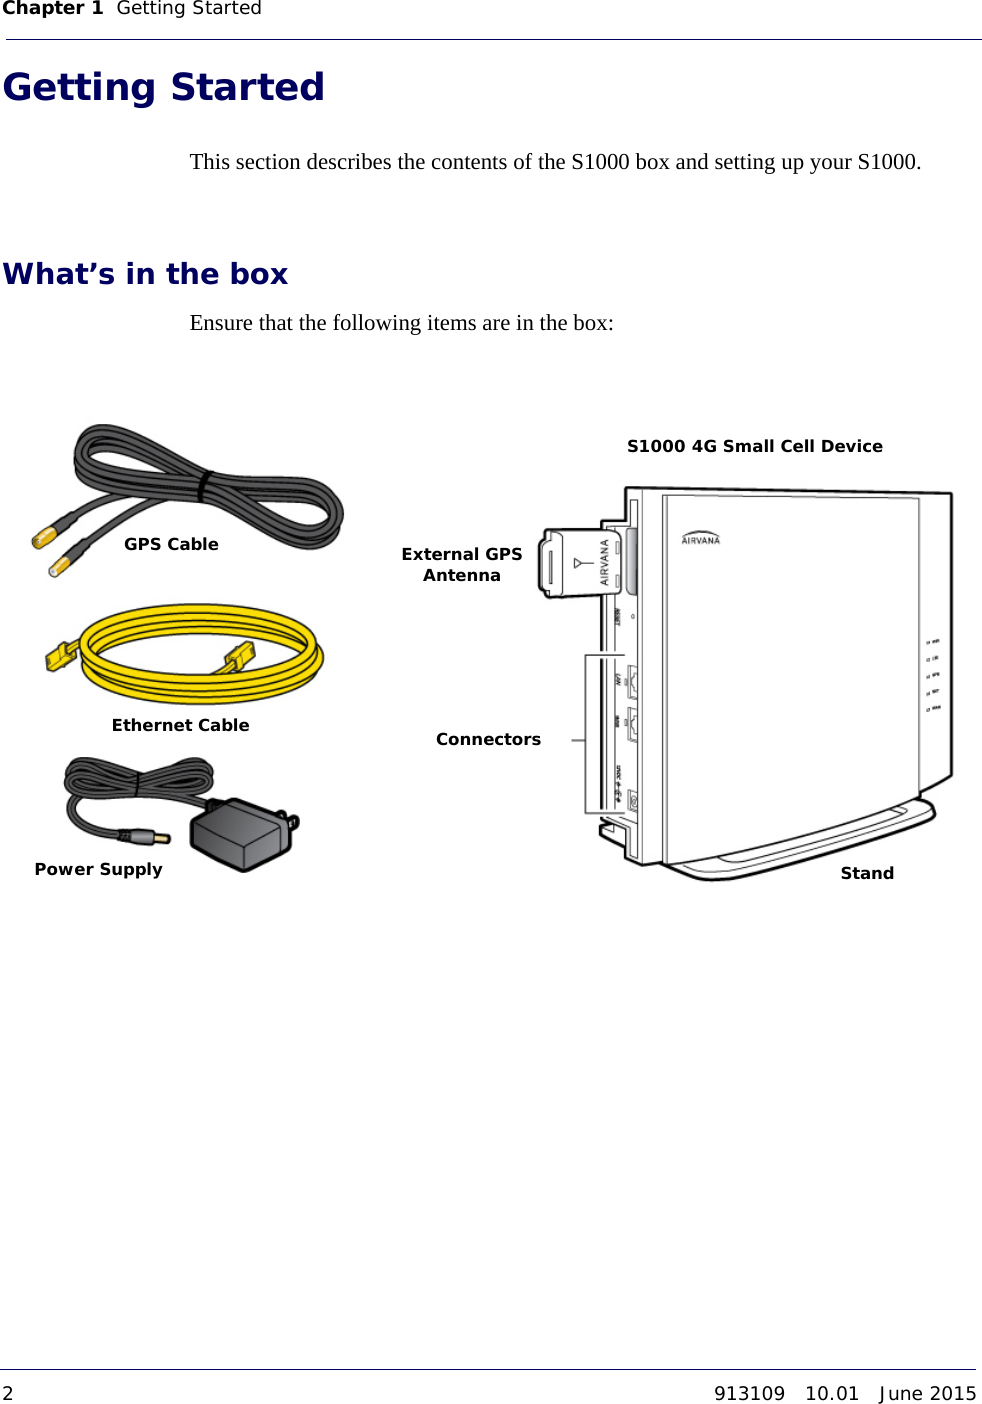 Chapter 1   Getting Started 2913109   10.01   June 2015DRAFTGetting StartedThis section describes the contents of the S1000 box and setting up your S1000. What’s in the boxEnsure that the following items are in the box:S1000 4G Small Cell DeviceGPS CableEthernet CablePower SupplyExternal GPS AntennaConnectorsStand